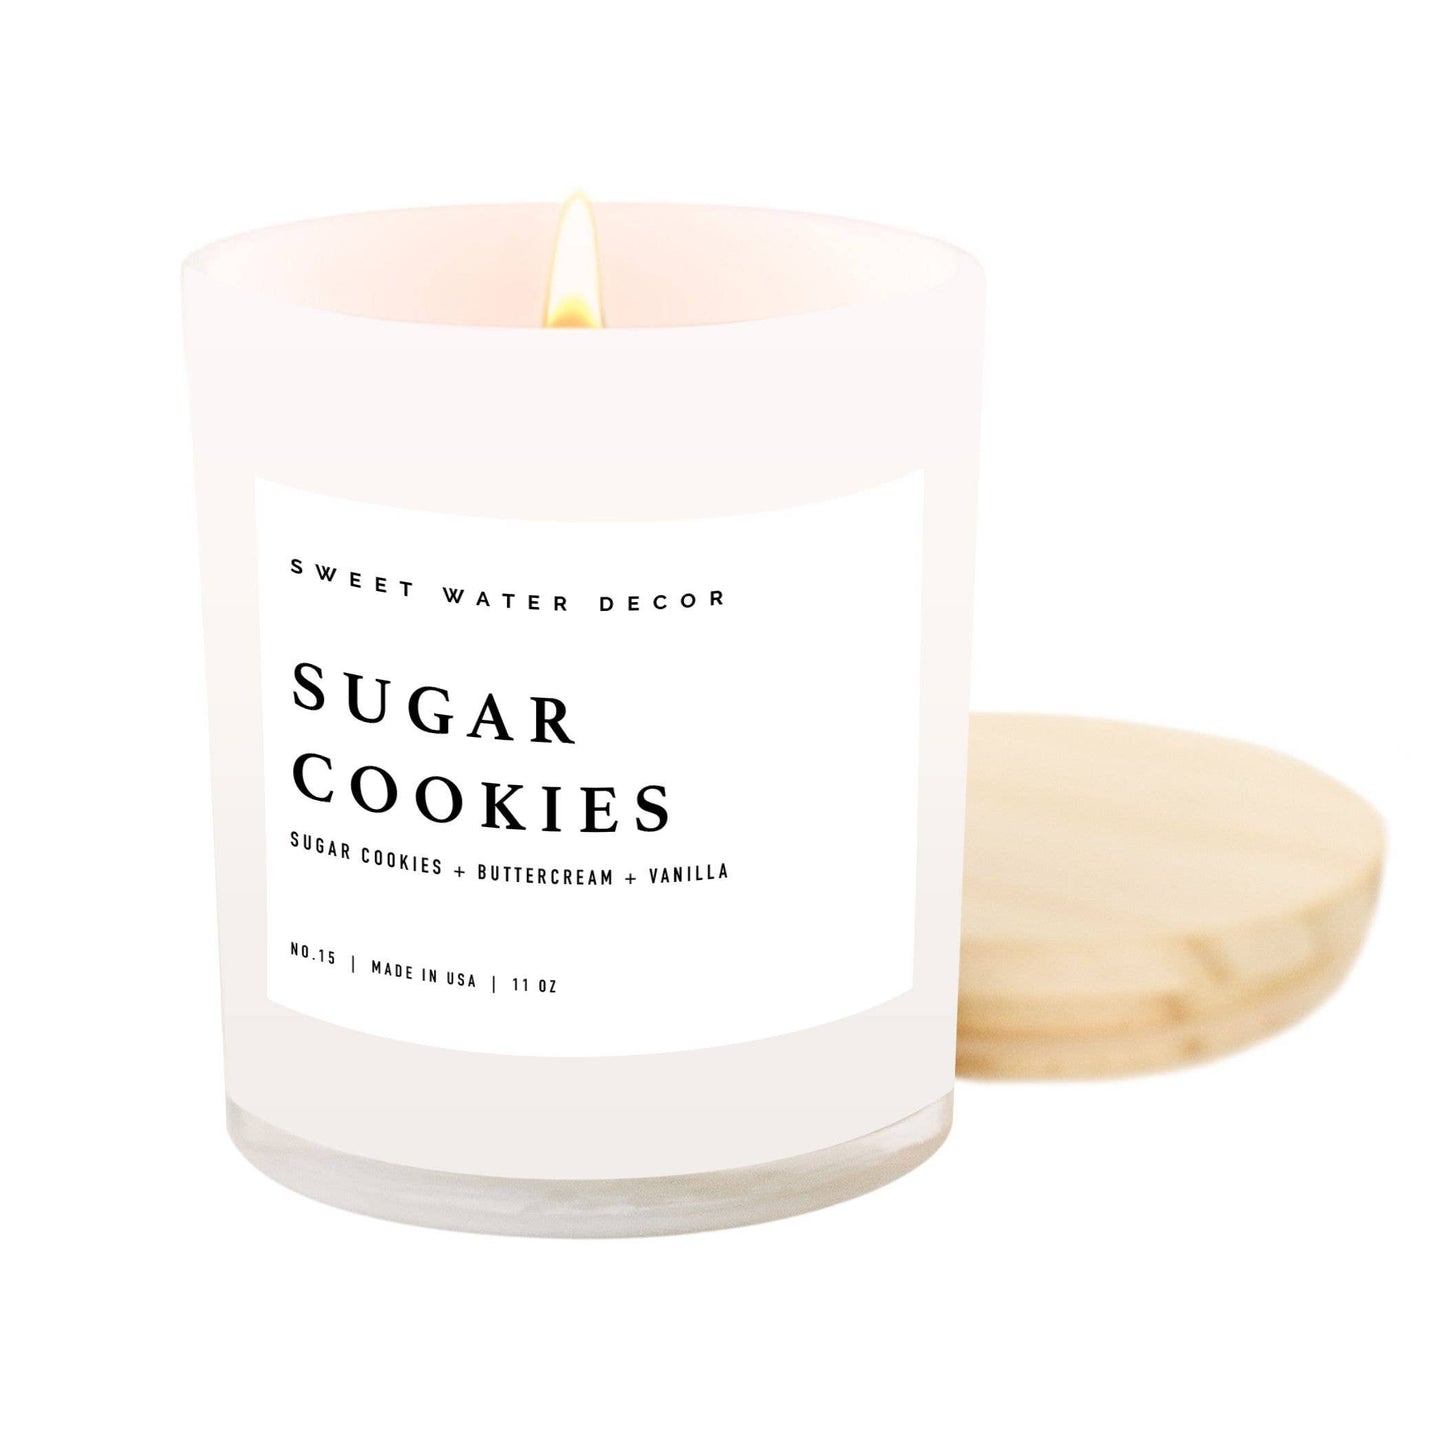 Sweet Water Decor - Sugar Cookies Soy Candle - White Jar - 11 oz